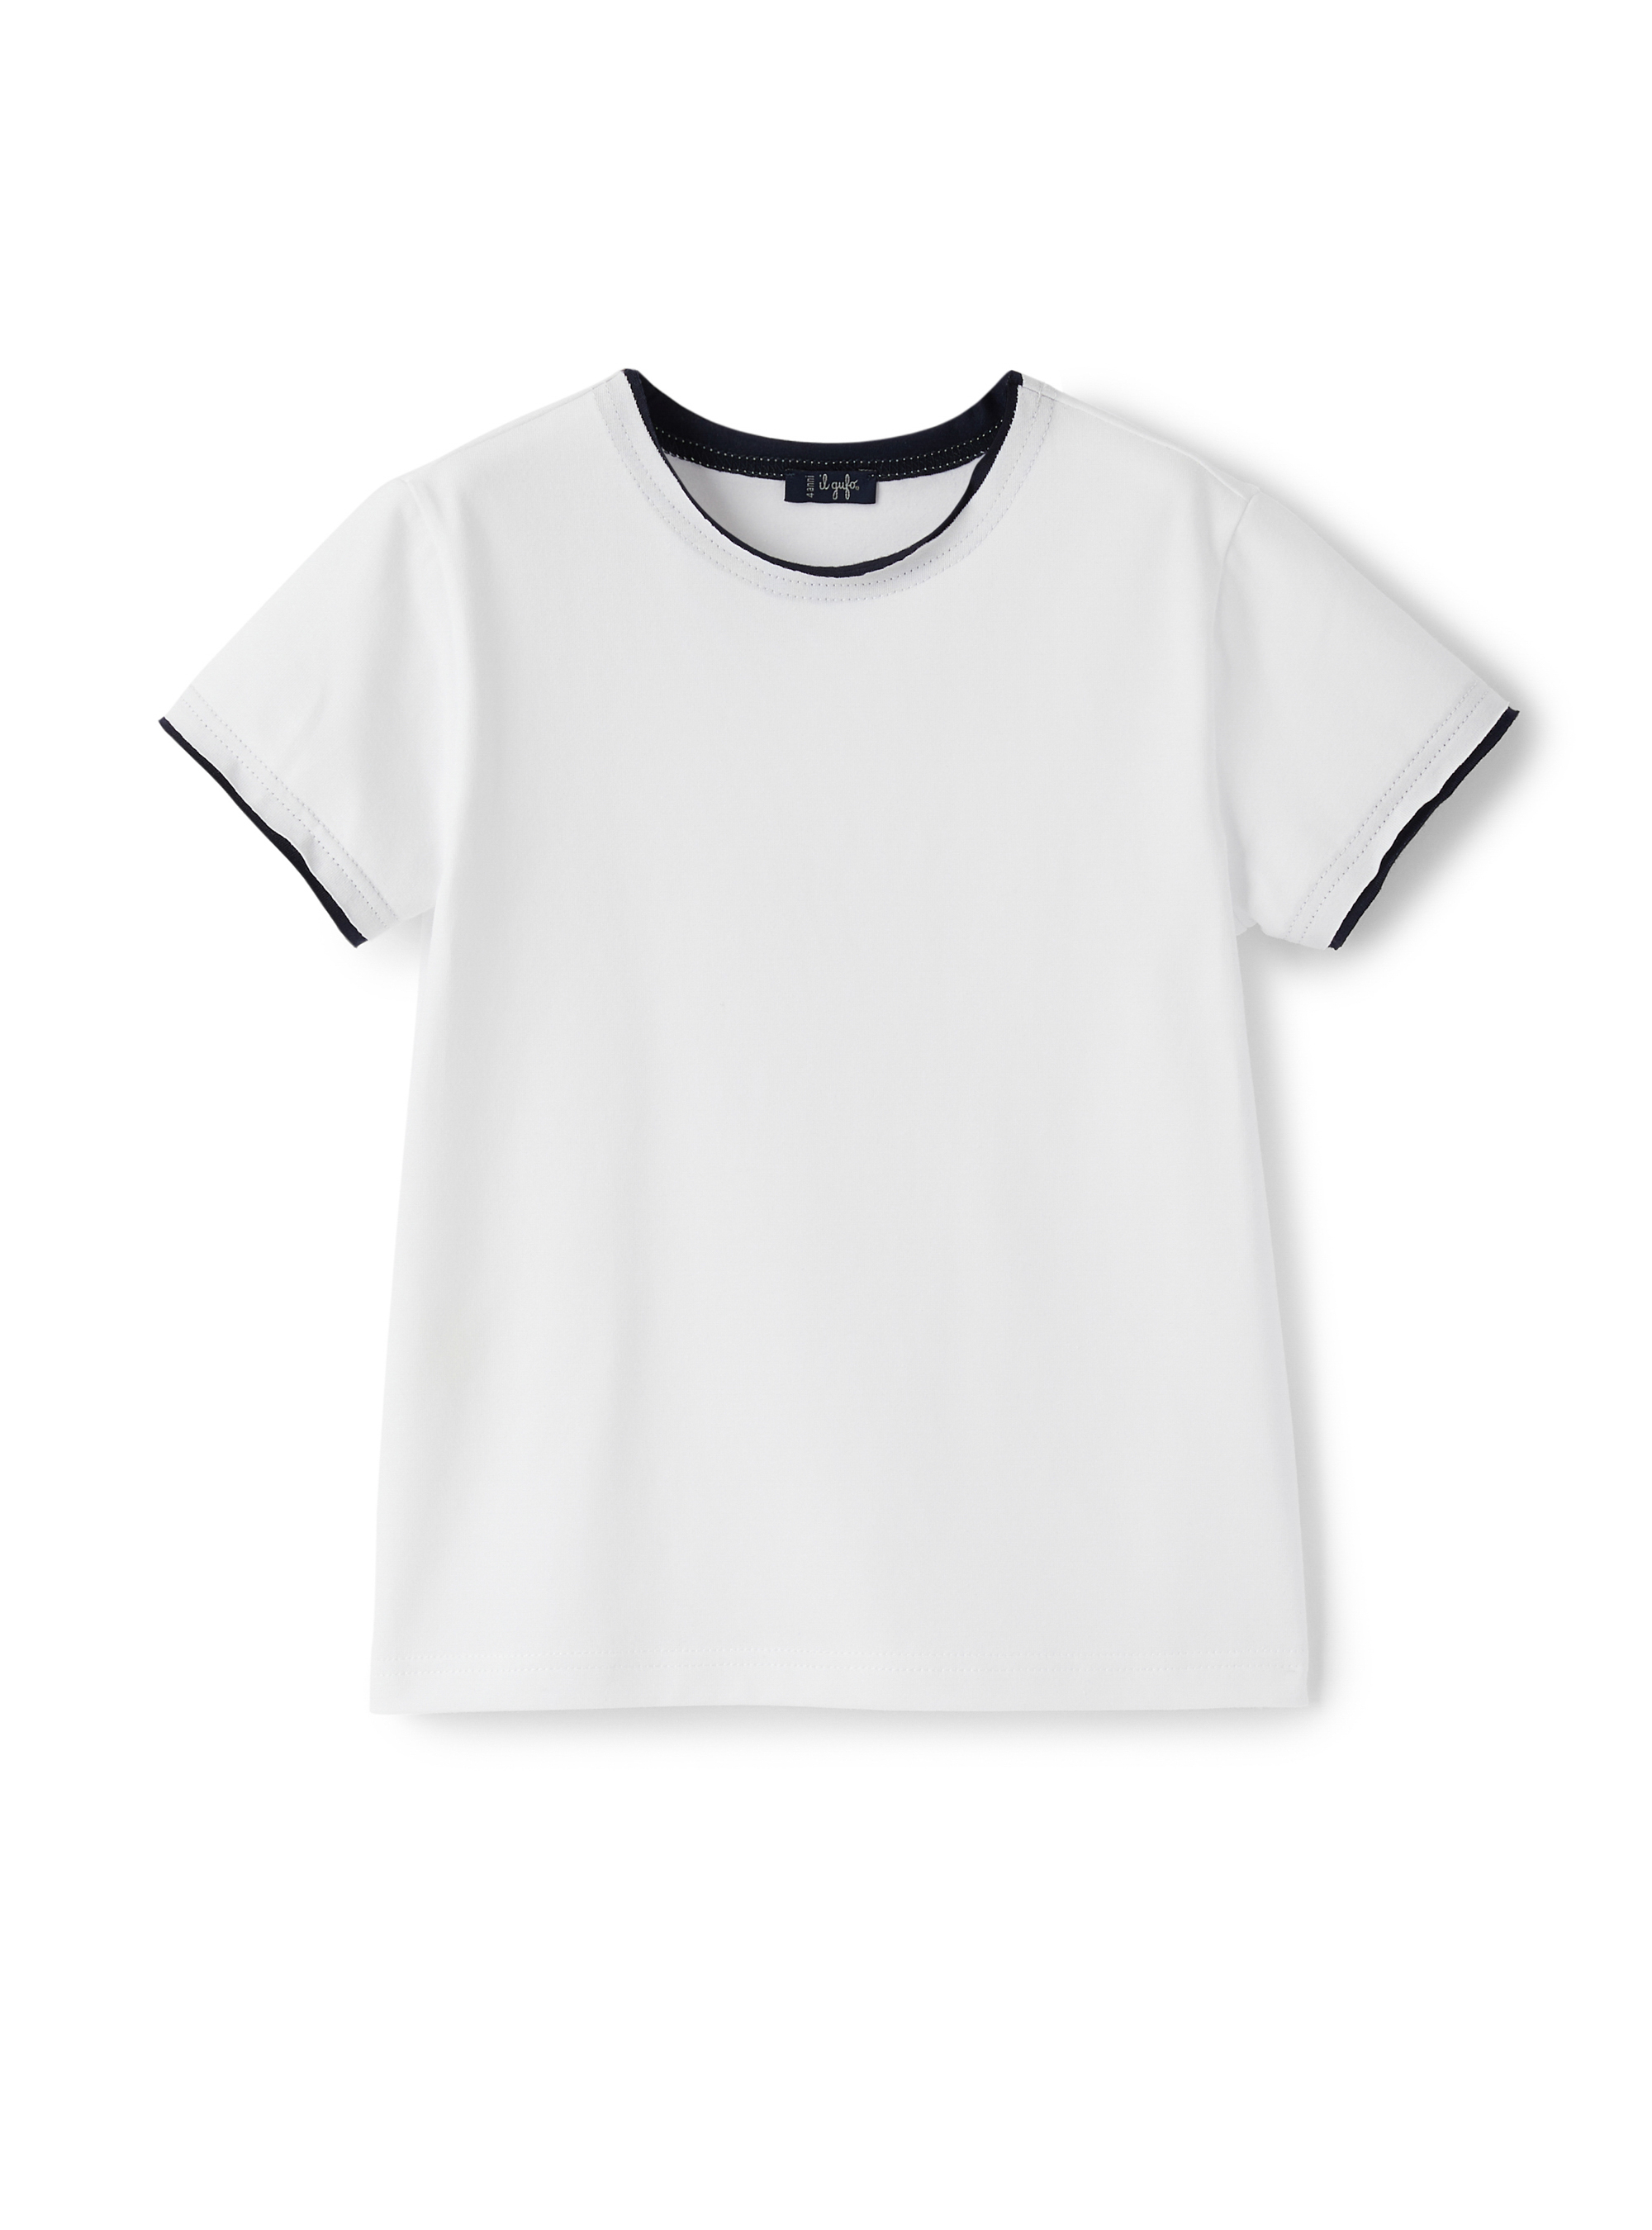 White t-shirt with blue profiles - T-shirts - Il Gufo